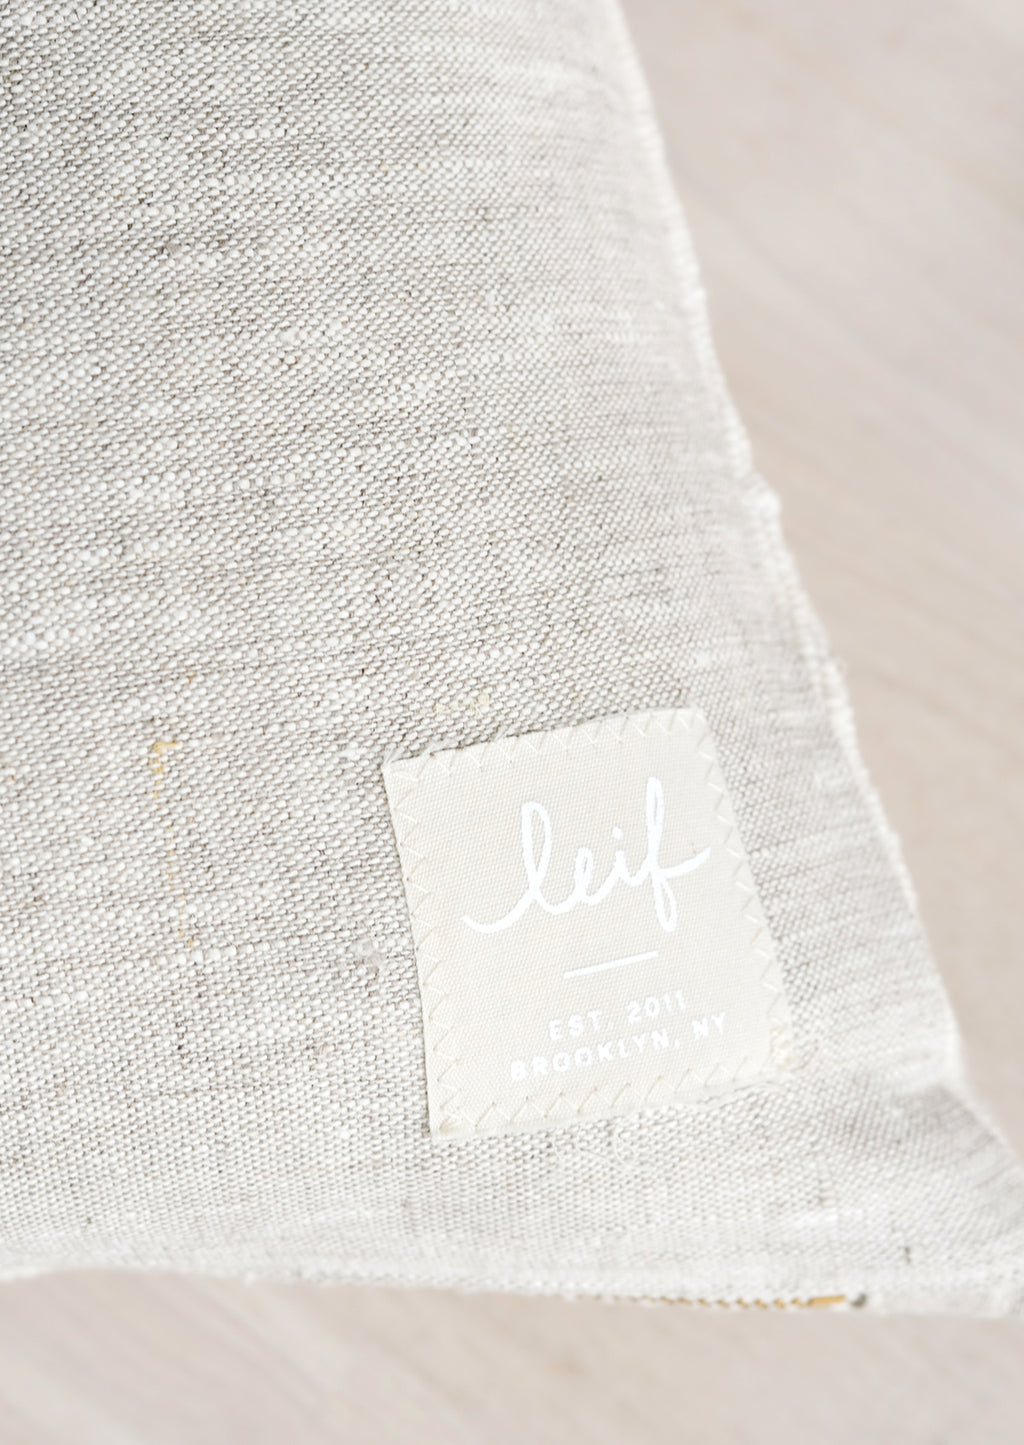 3: Natural linen with hand-stitched square logo patch at bottom corner.